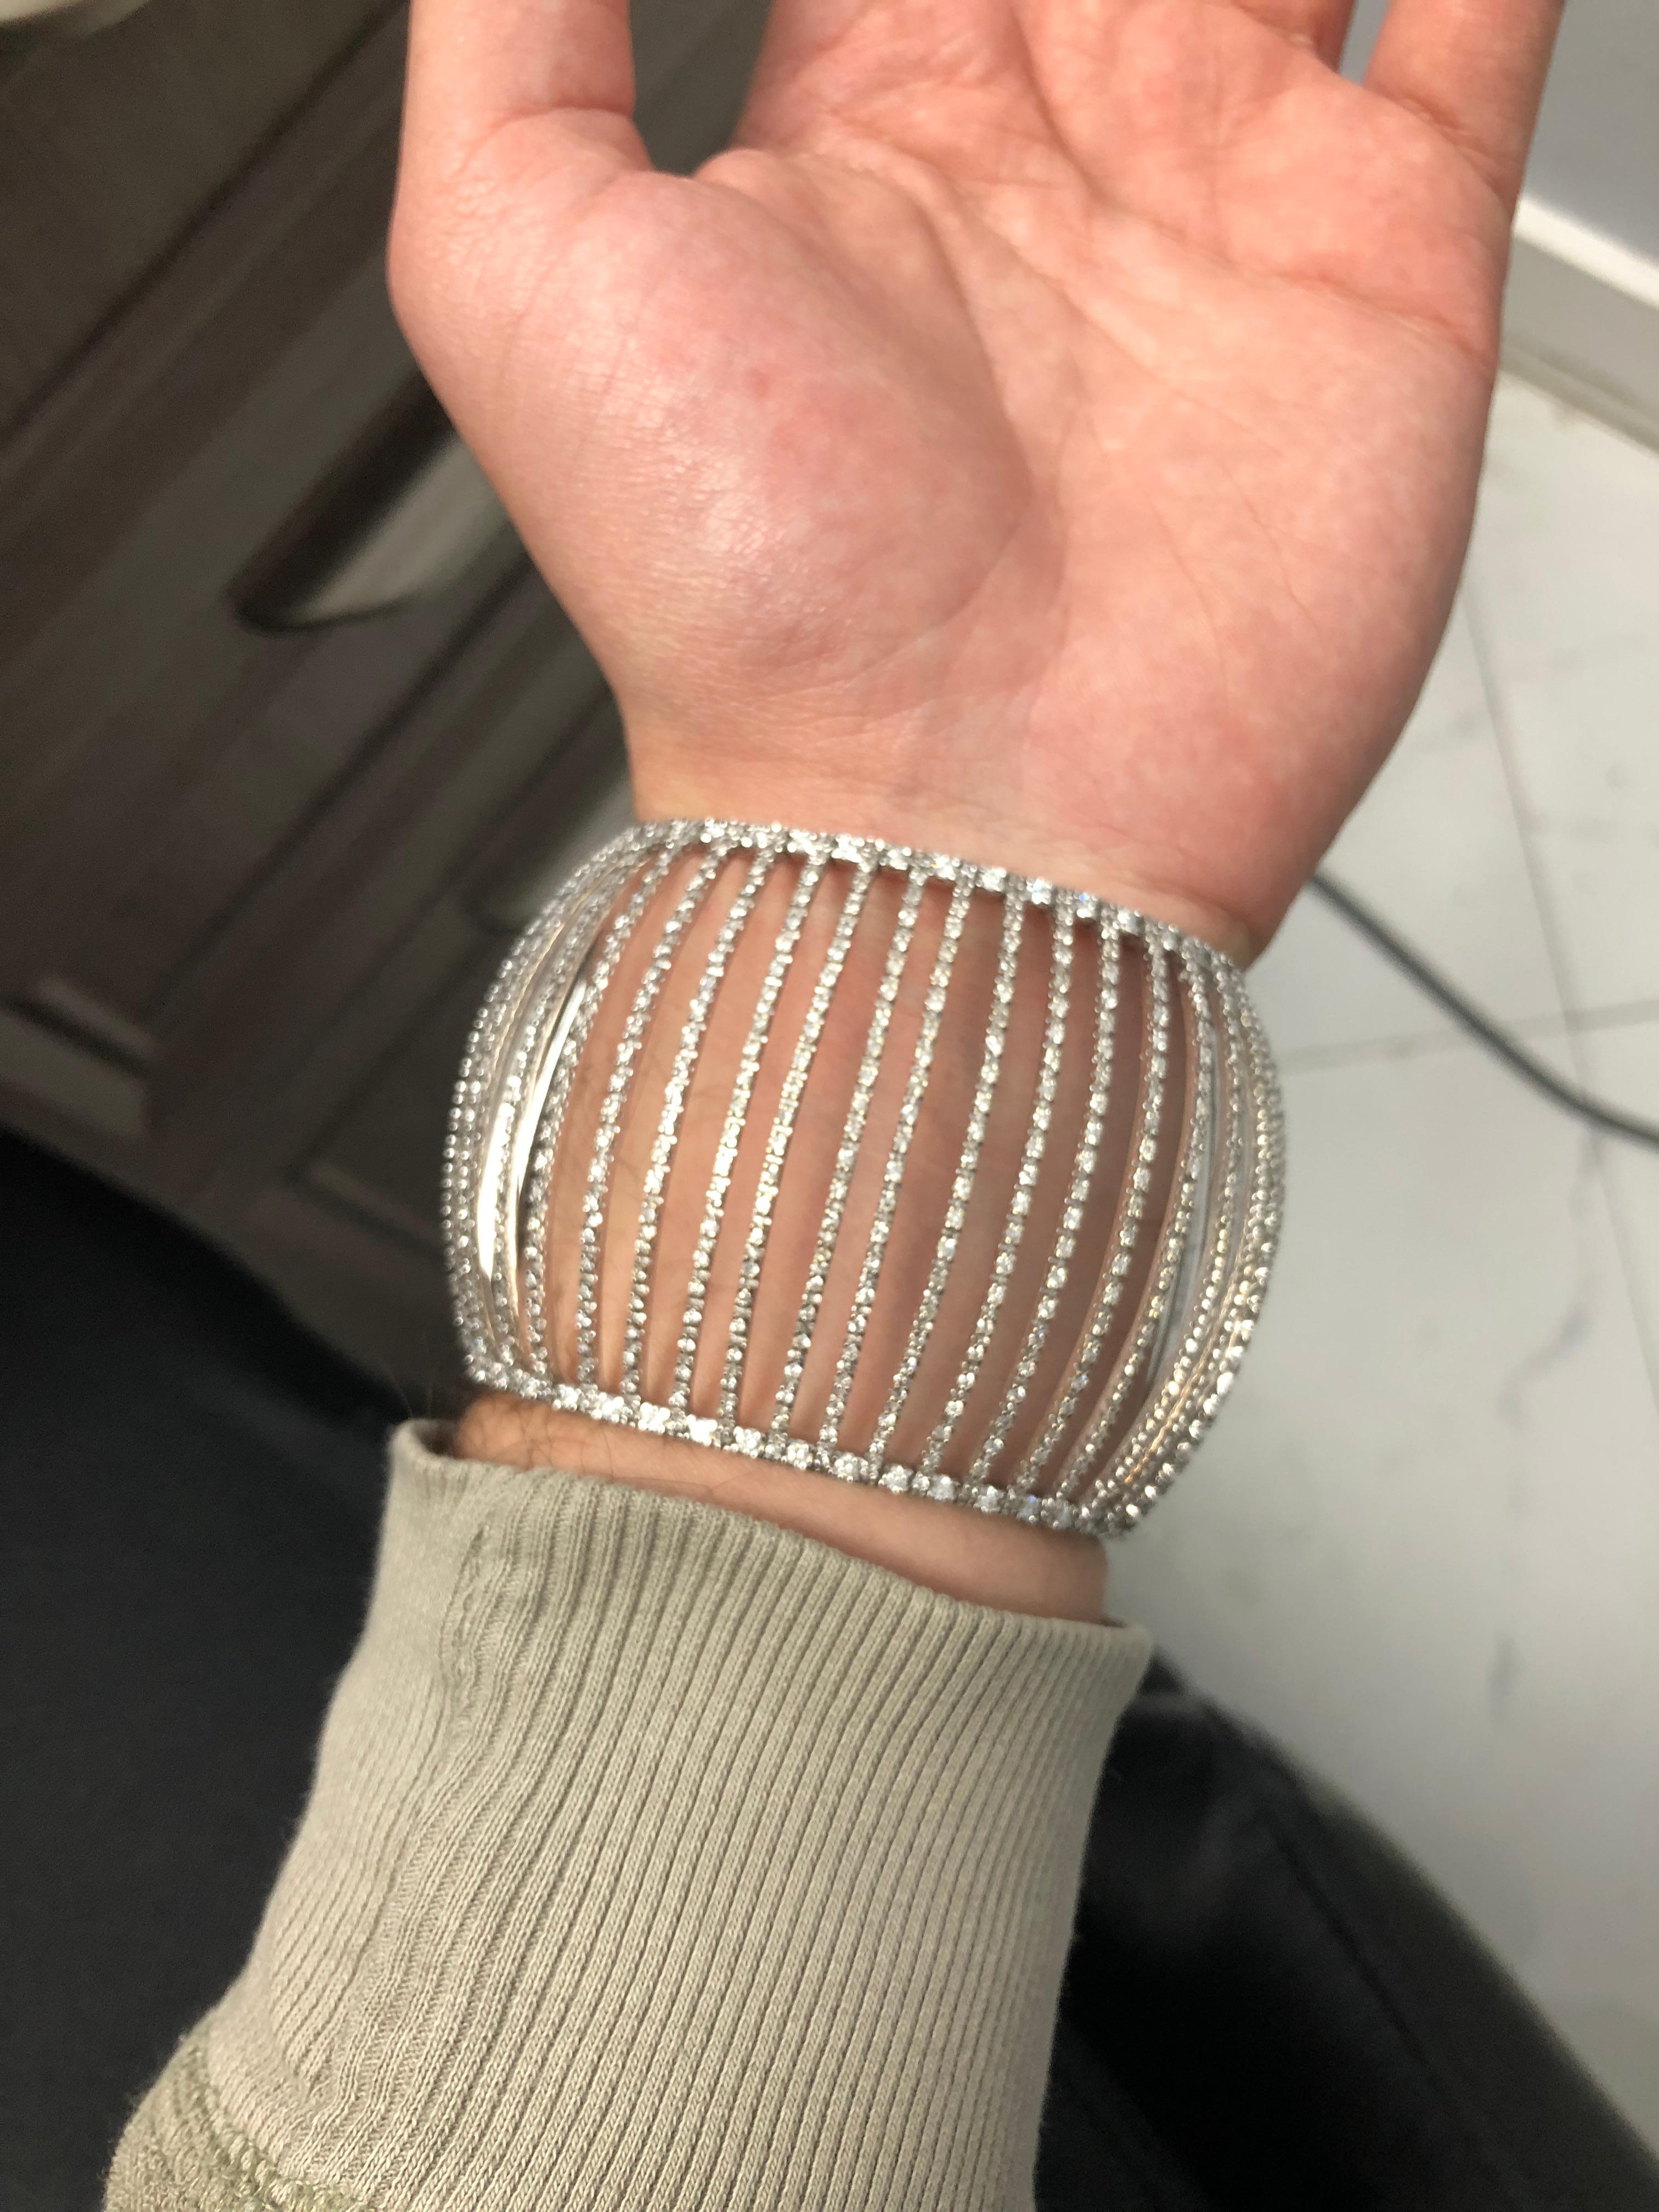 The cuff bangle features round-cut diamonds weighing a total of approximately 5.79 carats, set in 18K white gold.

Stones: Diamond ~ 5.79 carats

Metal: 18K White Gold

Size: 2 1/4